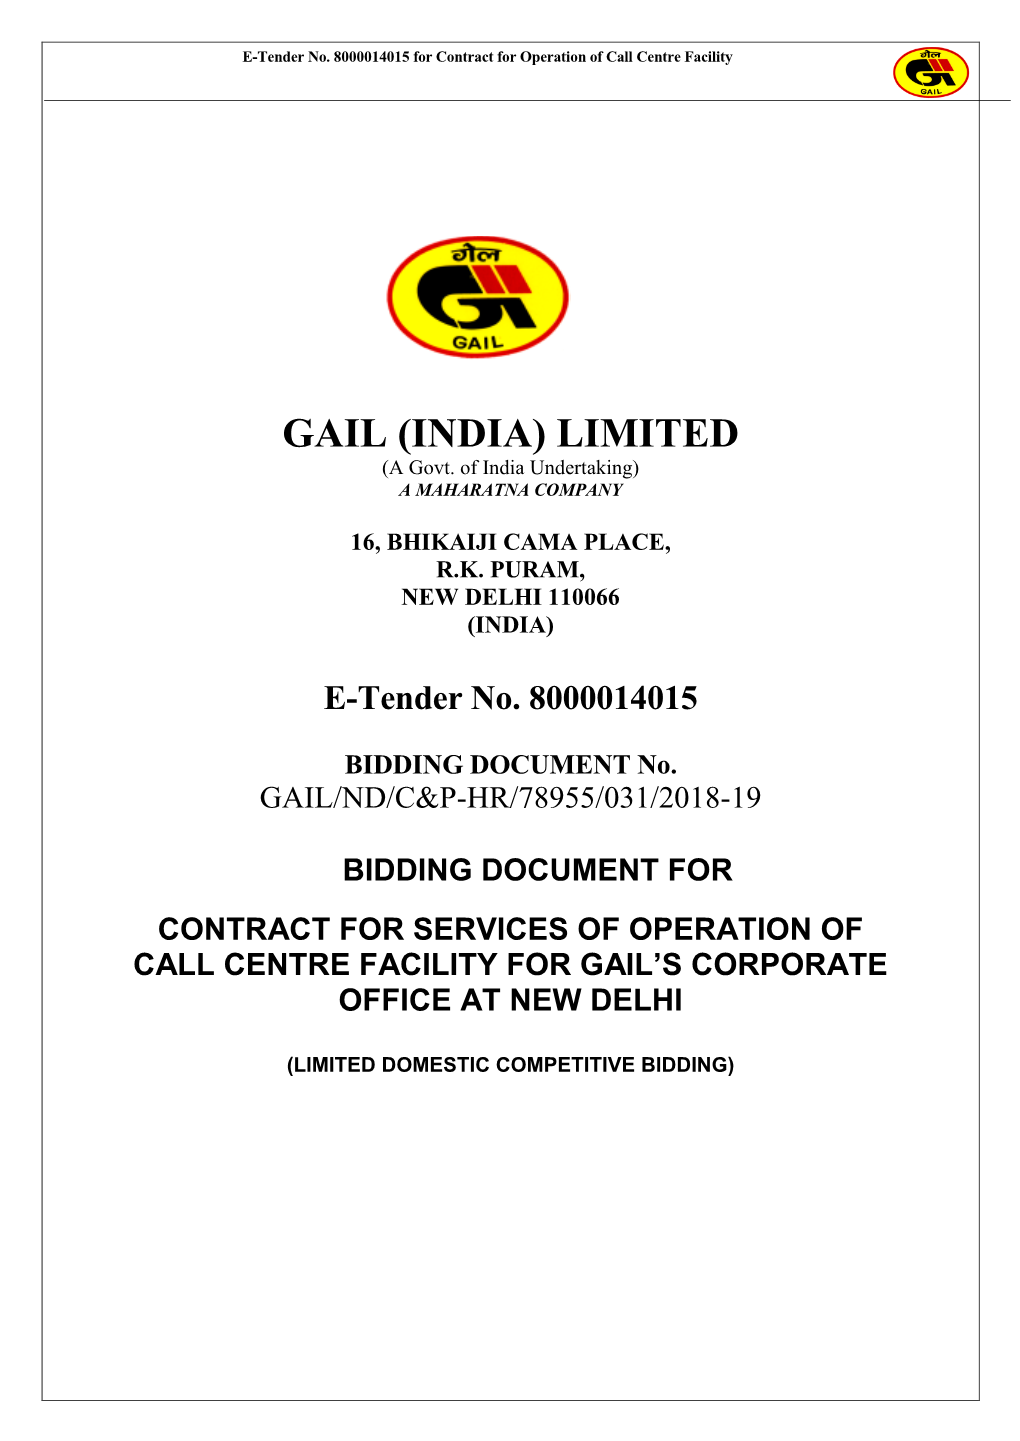 GAIL Tenders / Contracts